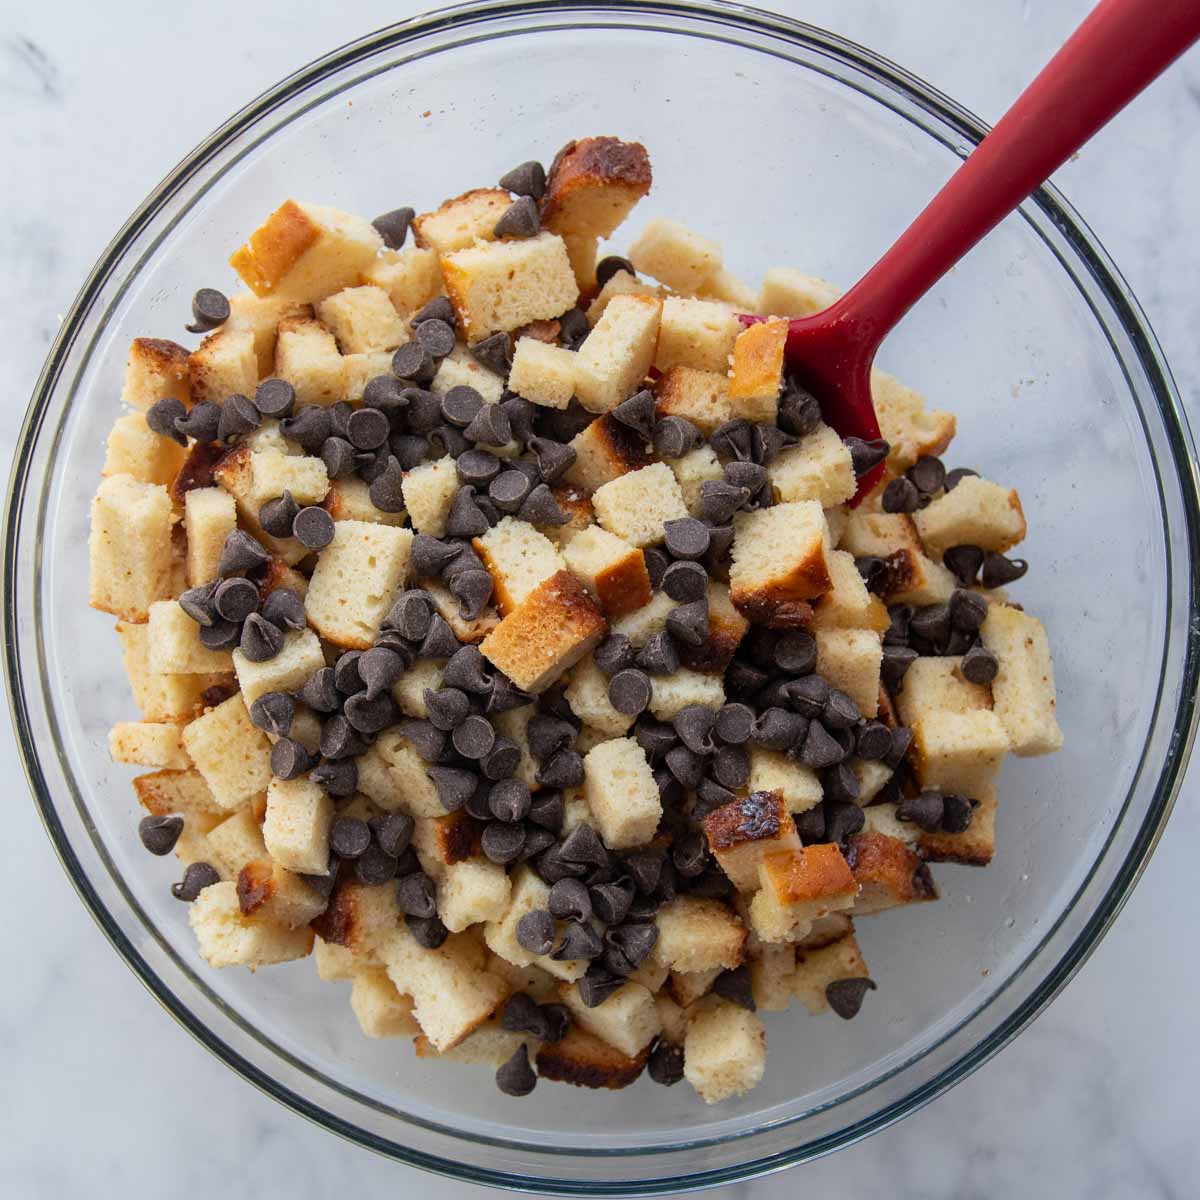 bread and chocolate chips in a bowl.